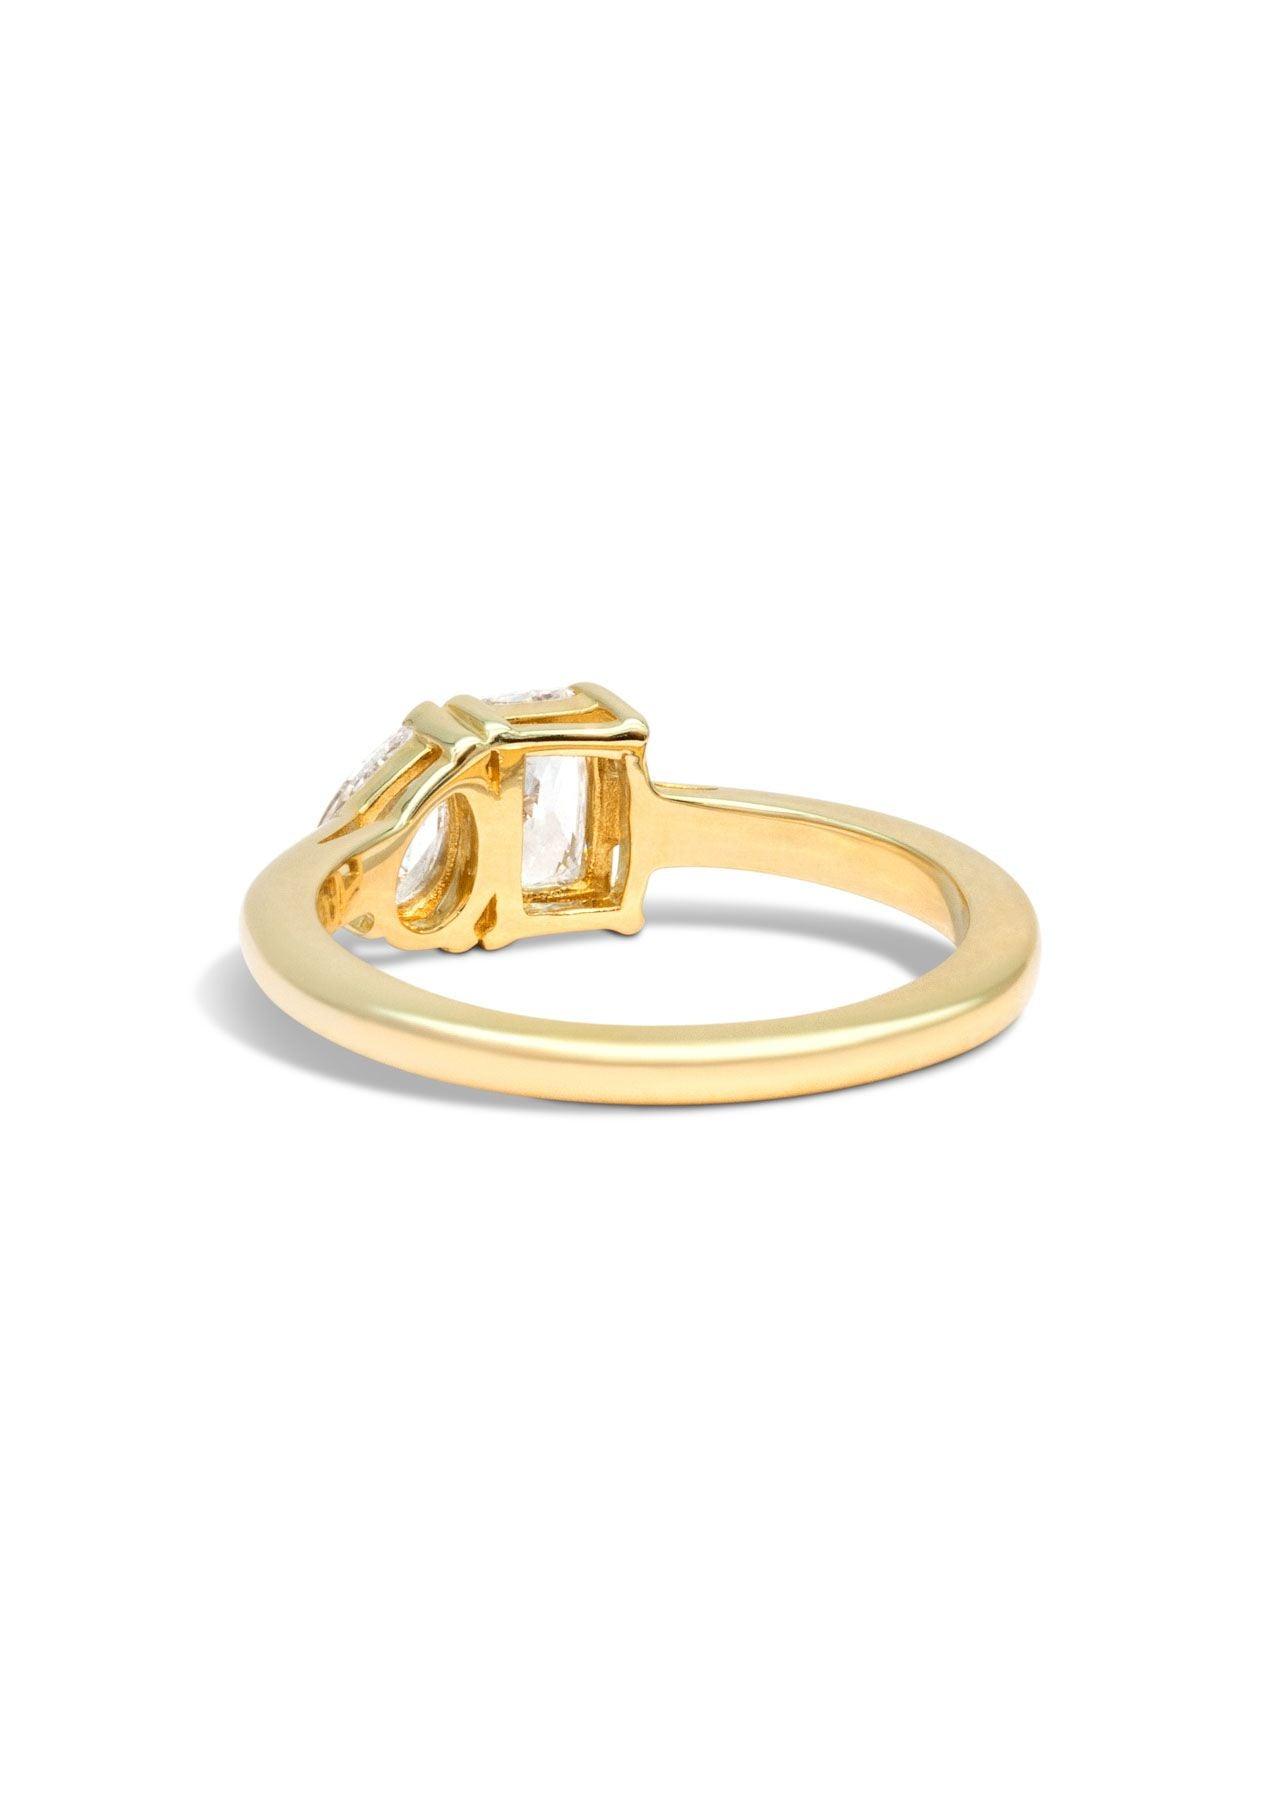 The Toi Et Moi Yellow Gold Cultured Diamond Ring